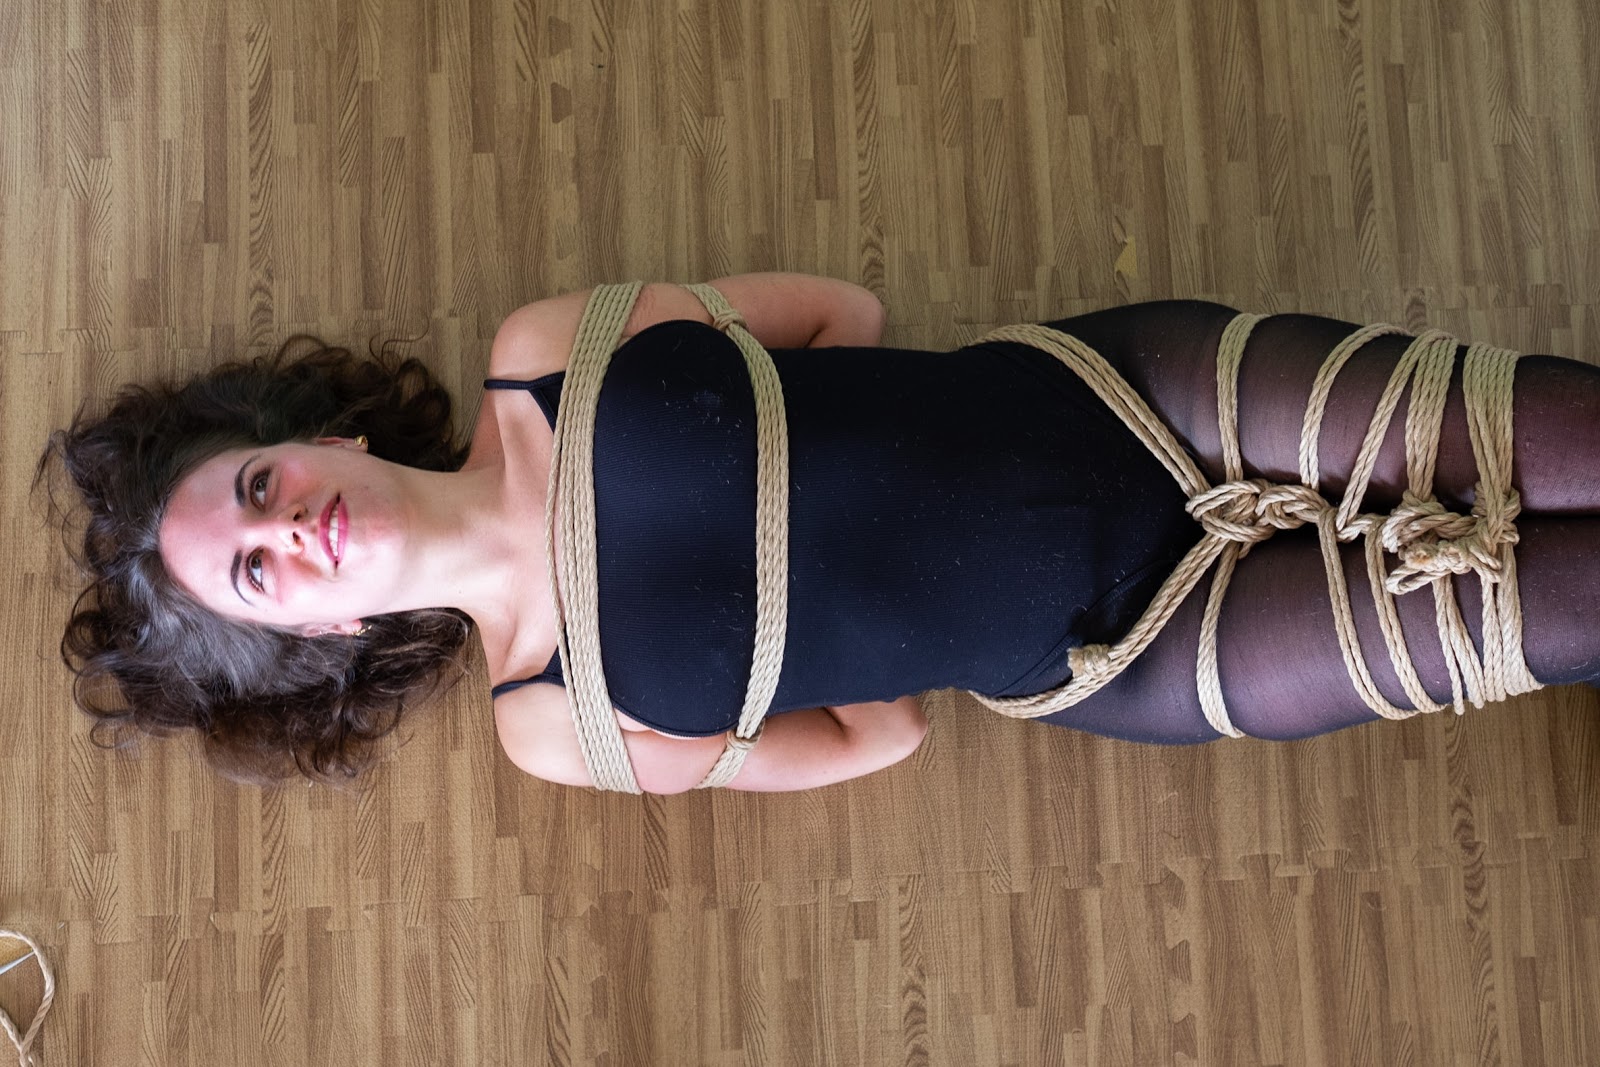 Japanese Bondage Upside - I Tried Japanese Bondage to Learn About the Beauty of Getting Tied Up